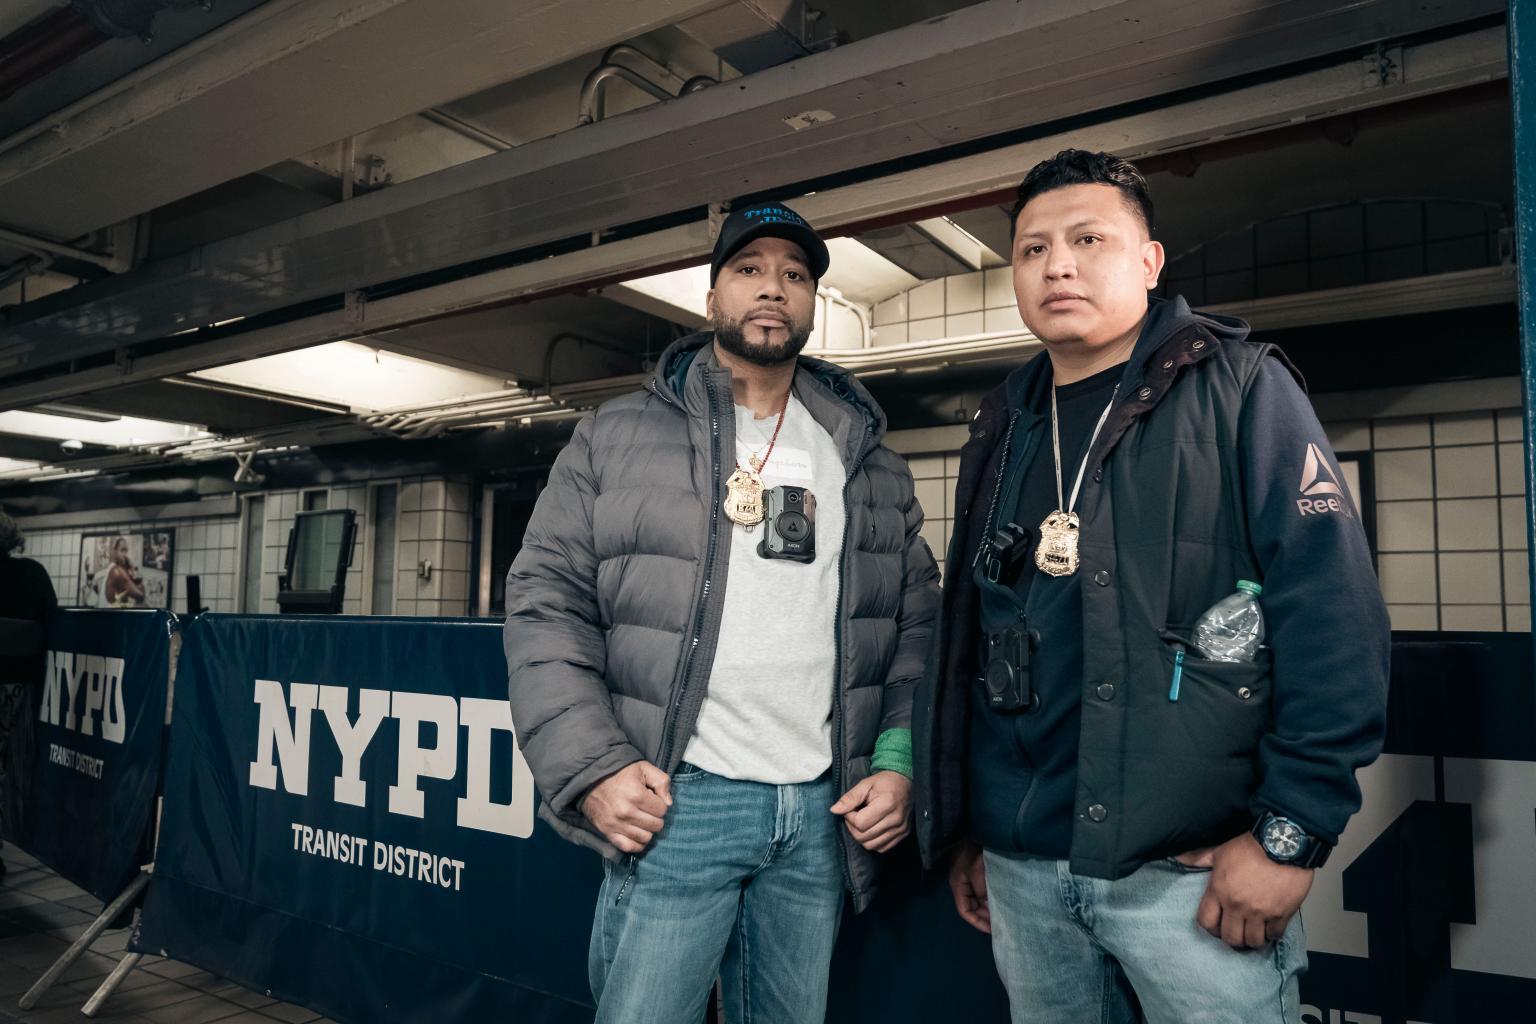 NYPD Faces Challenges Arresting Fare-Dodgers: Six Officers, Fifteen Minutes for One